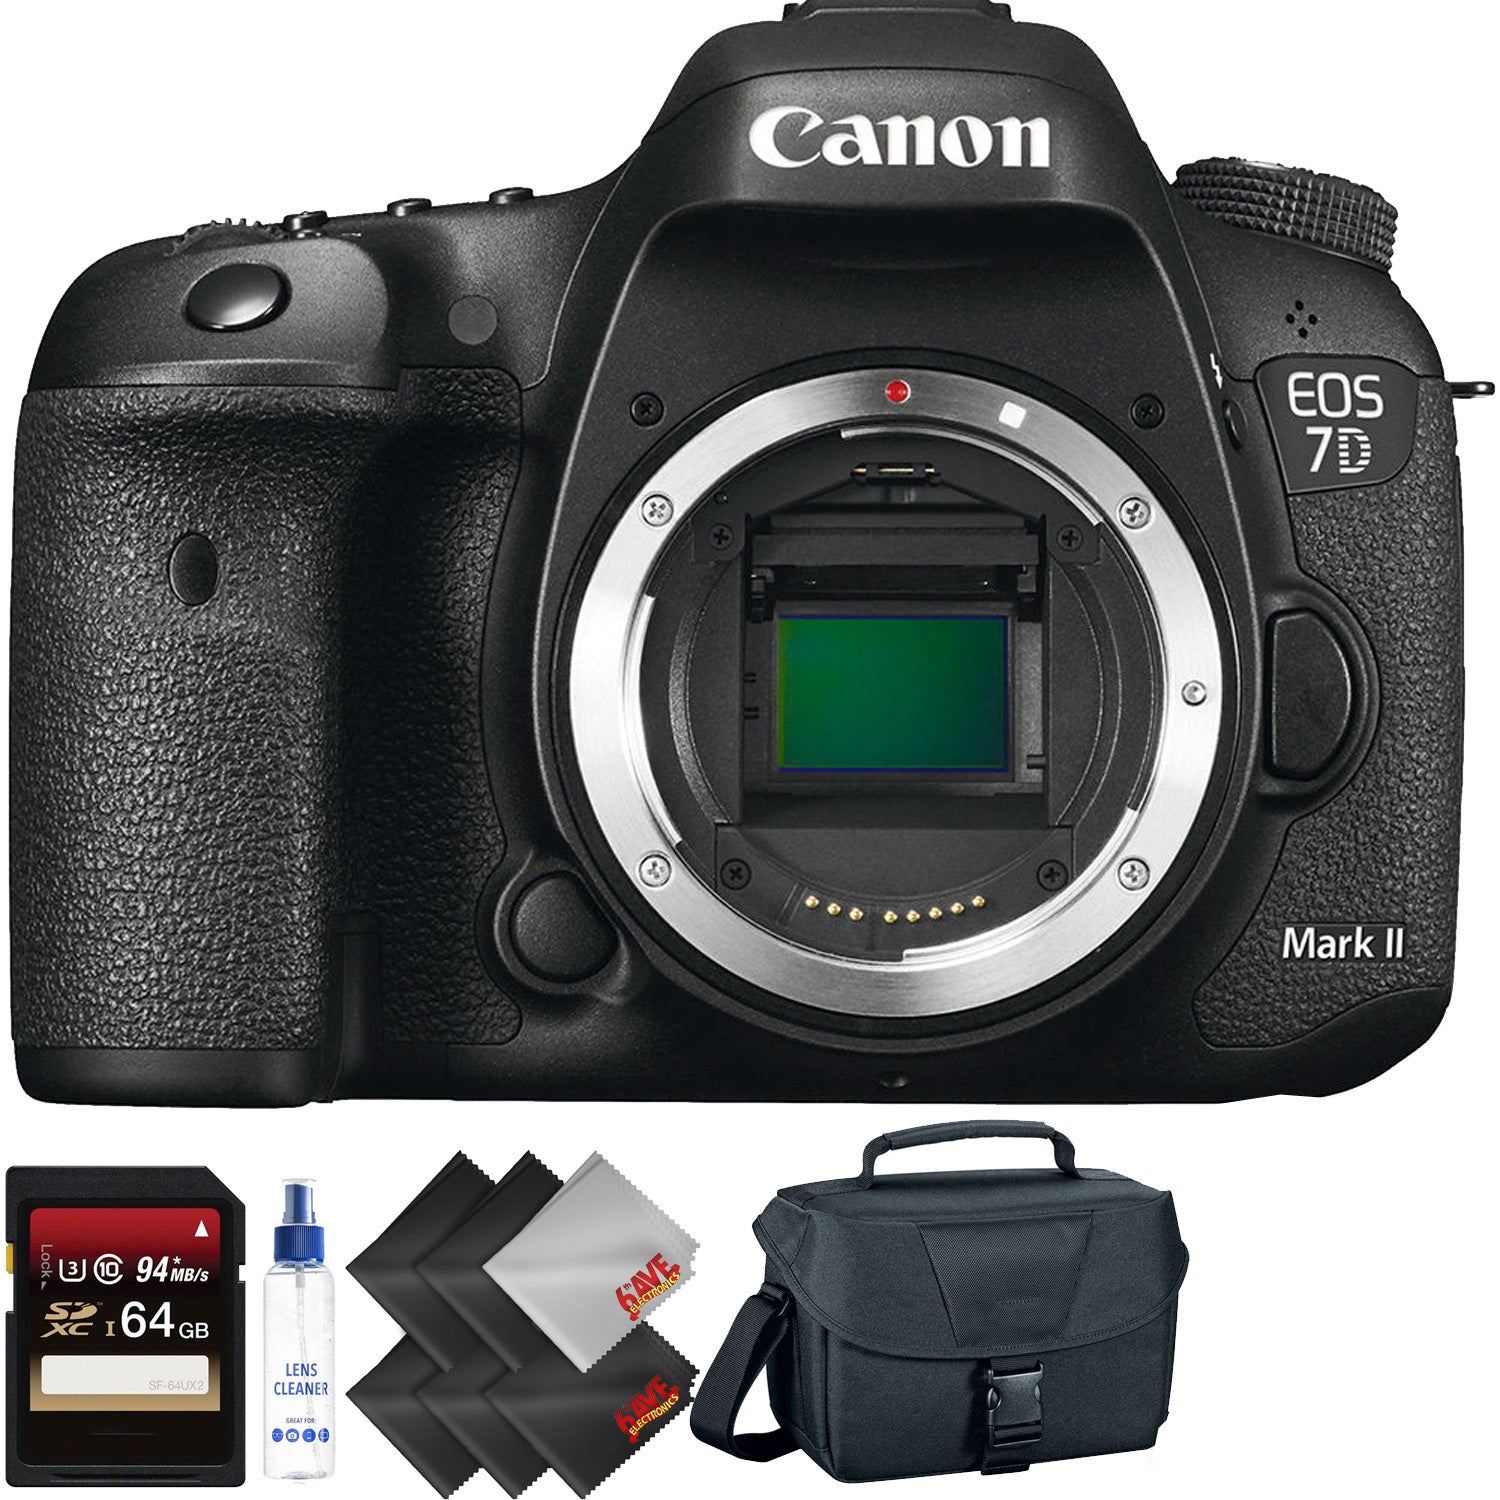 Canon EOS 7D Mark II DSLR Camera (Body Only) + 64GB Memory Card + 2 Year Accidental Warranty